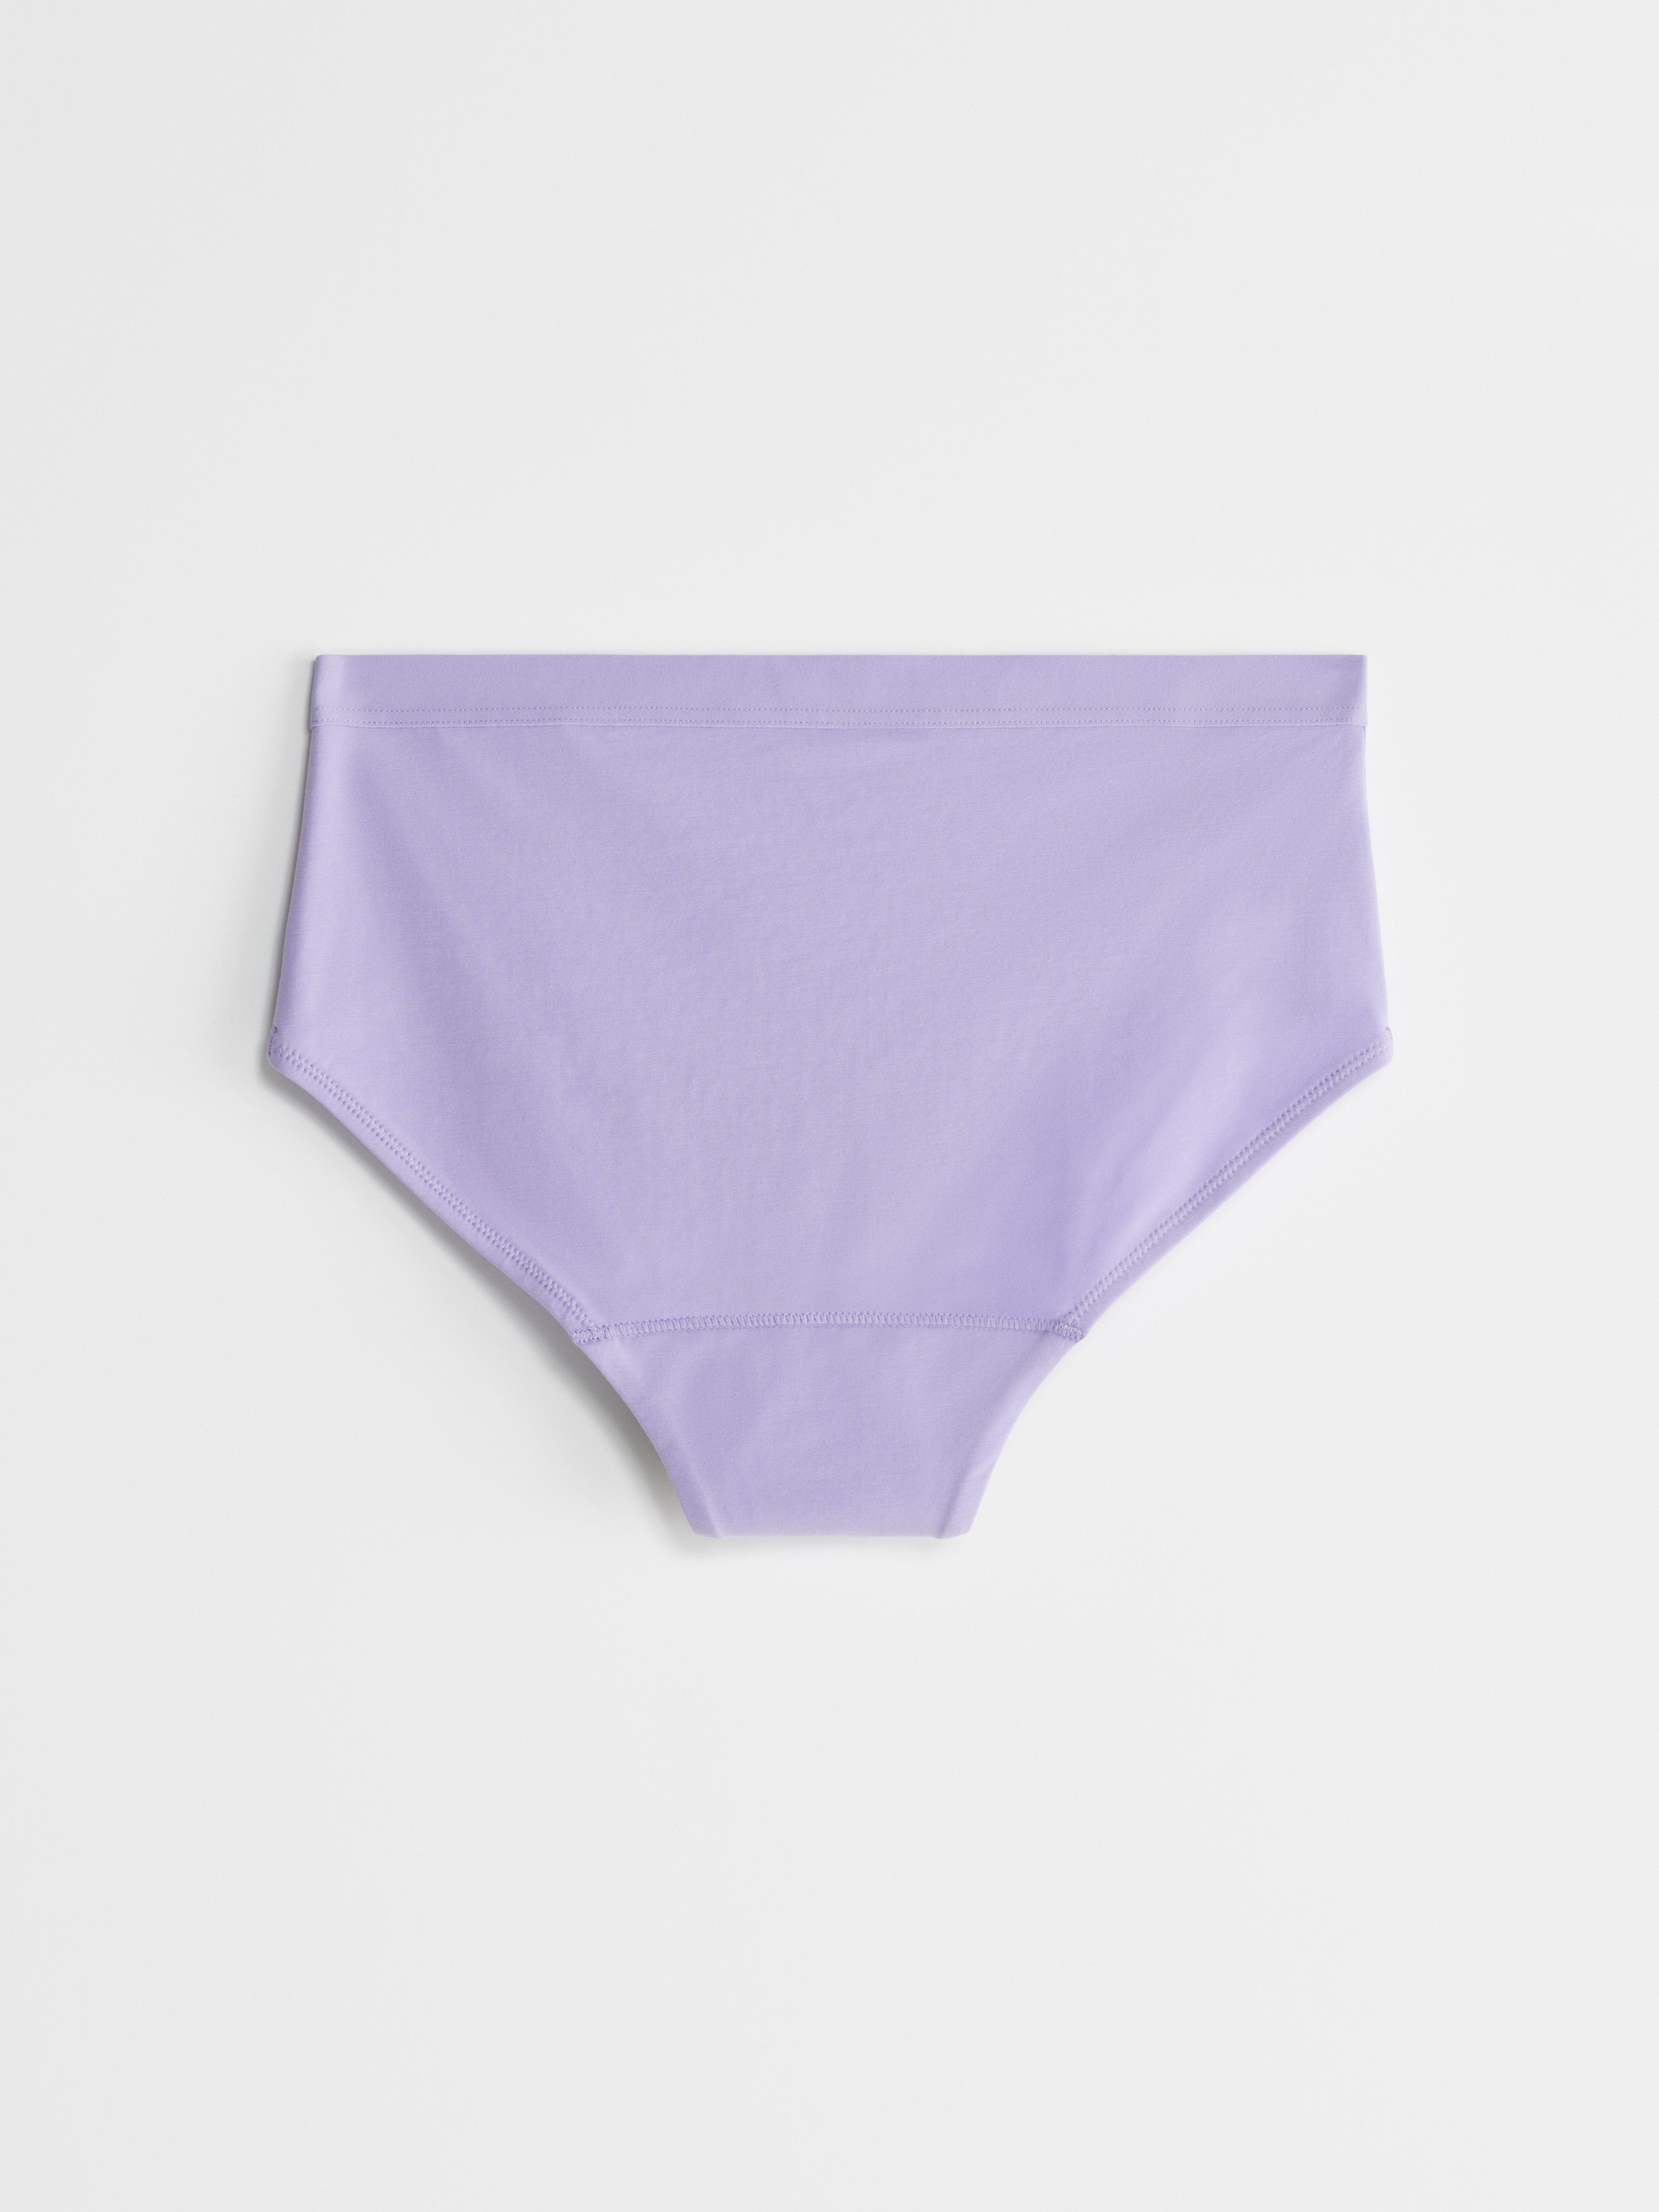 Period Panty with extended gusset - Teens Boxer Super - Female Engineering